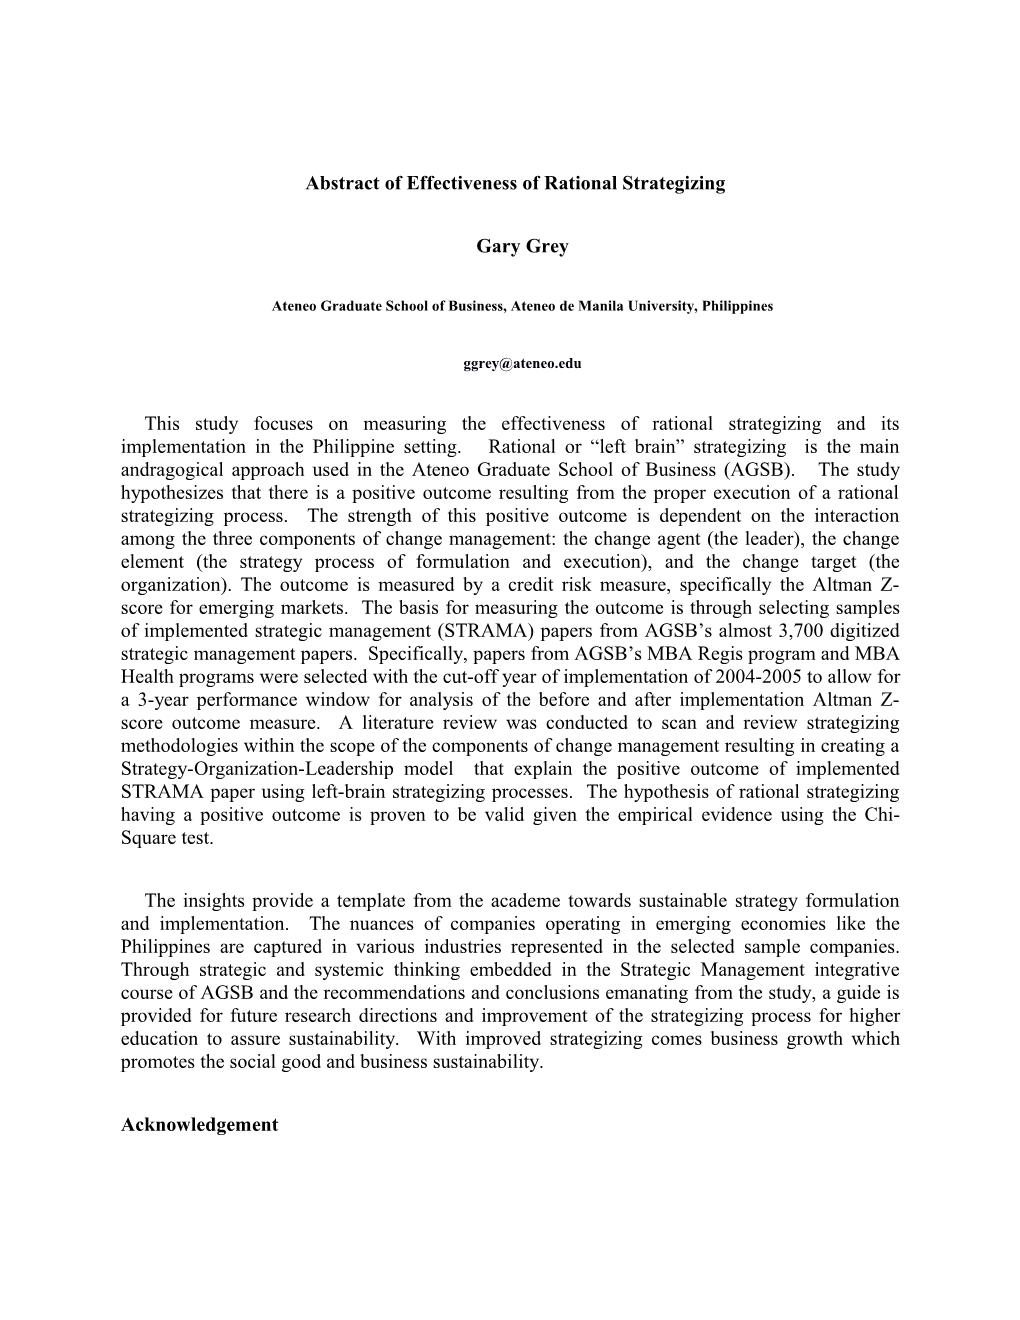 Abstract of Effectiveness of Rational Strategizing